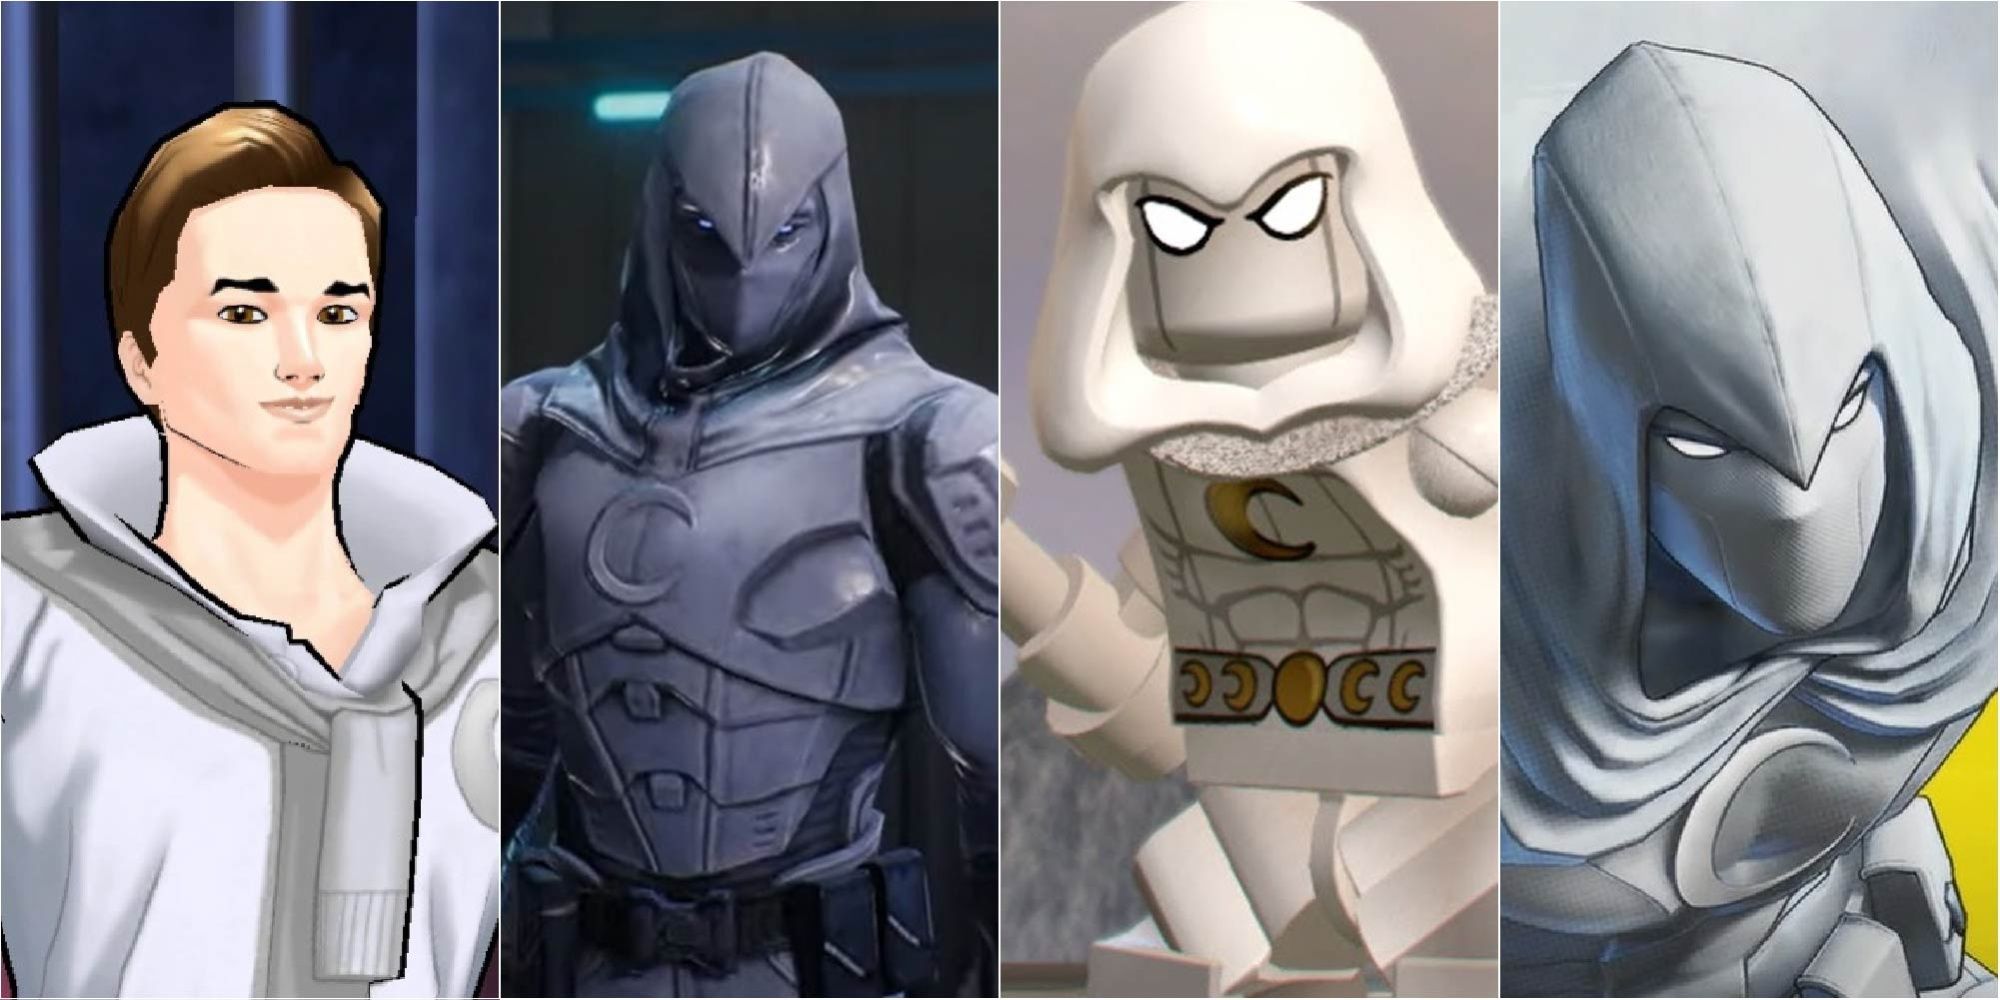 Moon Knight featured in Marvel Avengers Academy, Marvel Future Revolution, Lego Marvel Super Heroes 2 and Marvel Ultimate Alliance 3